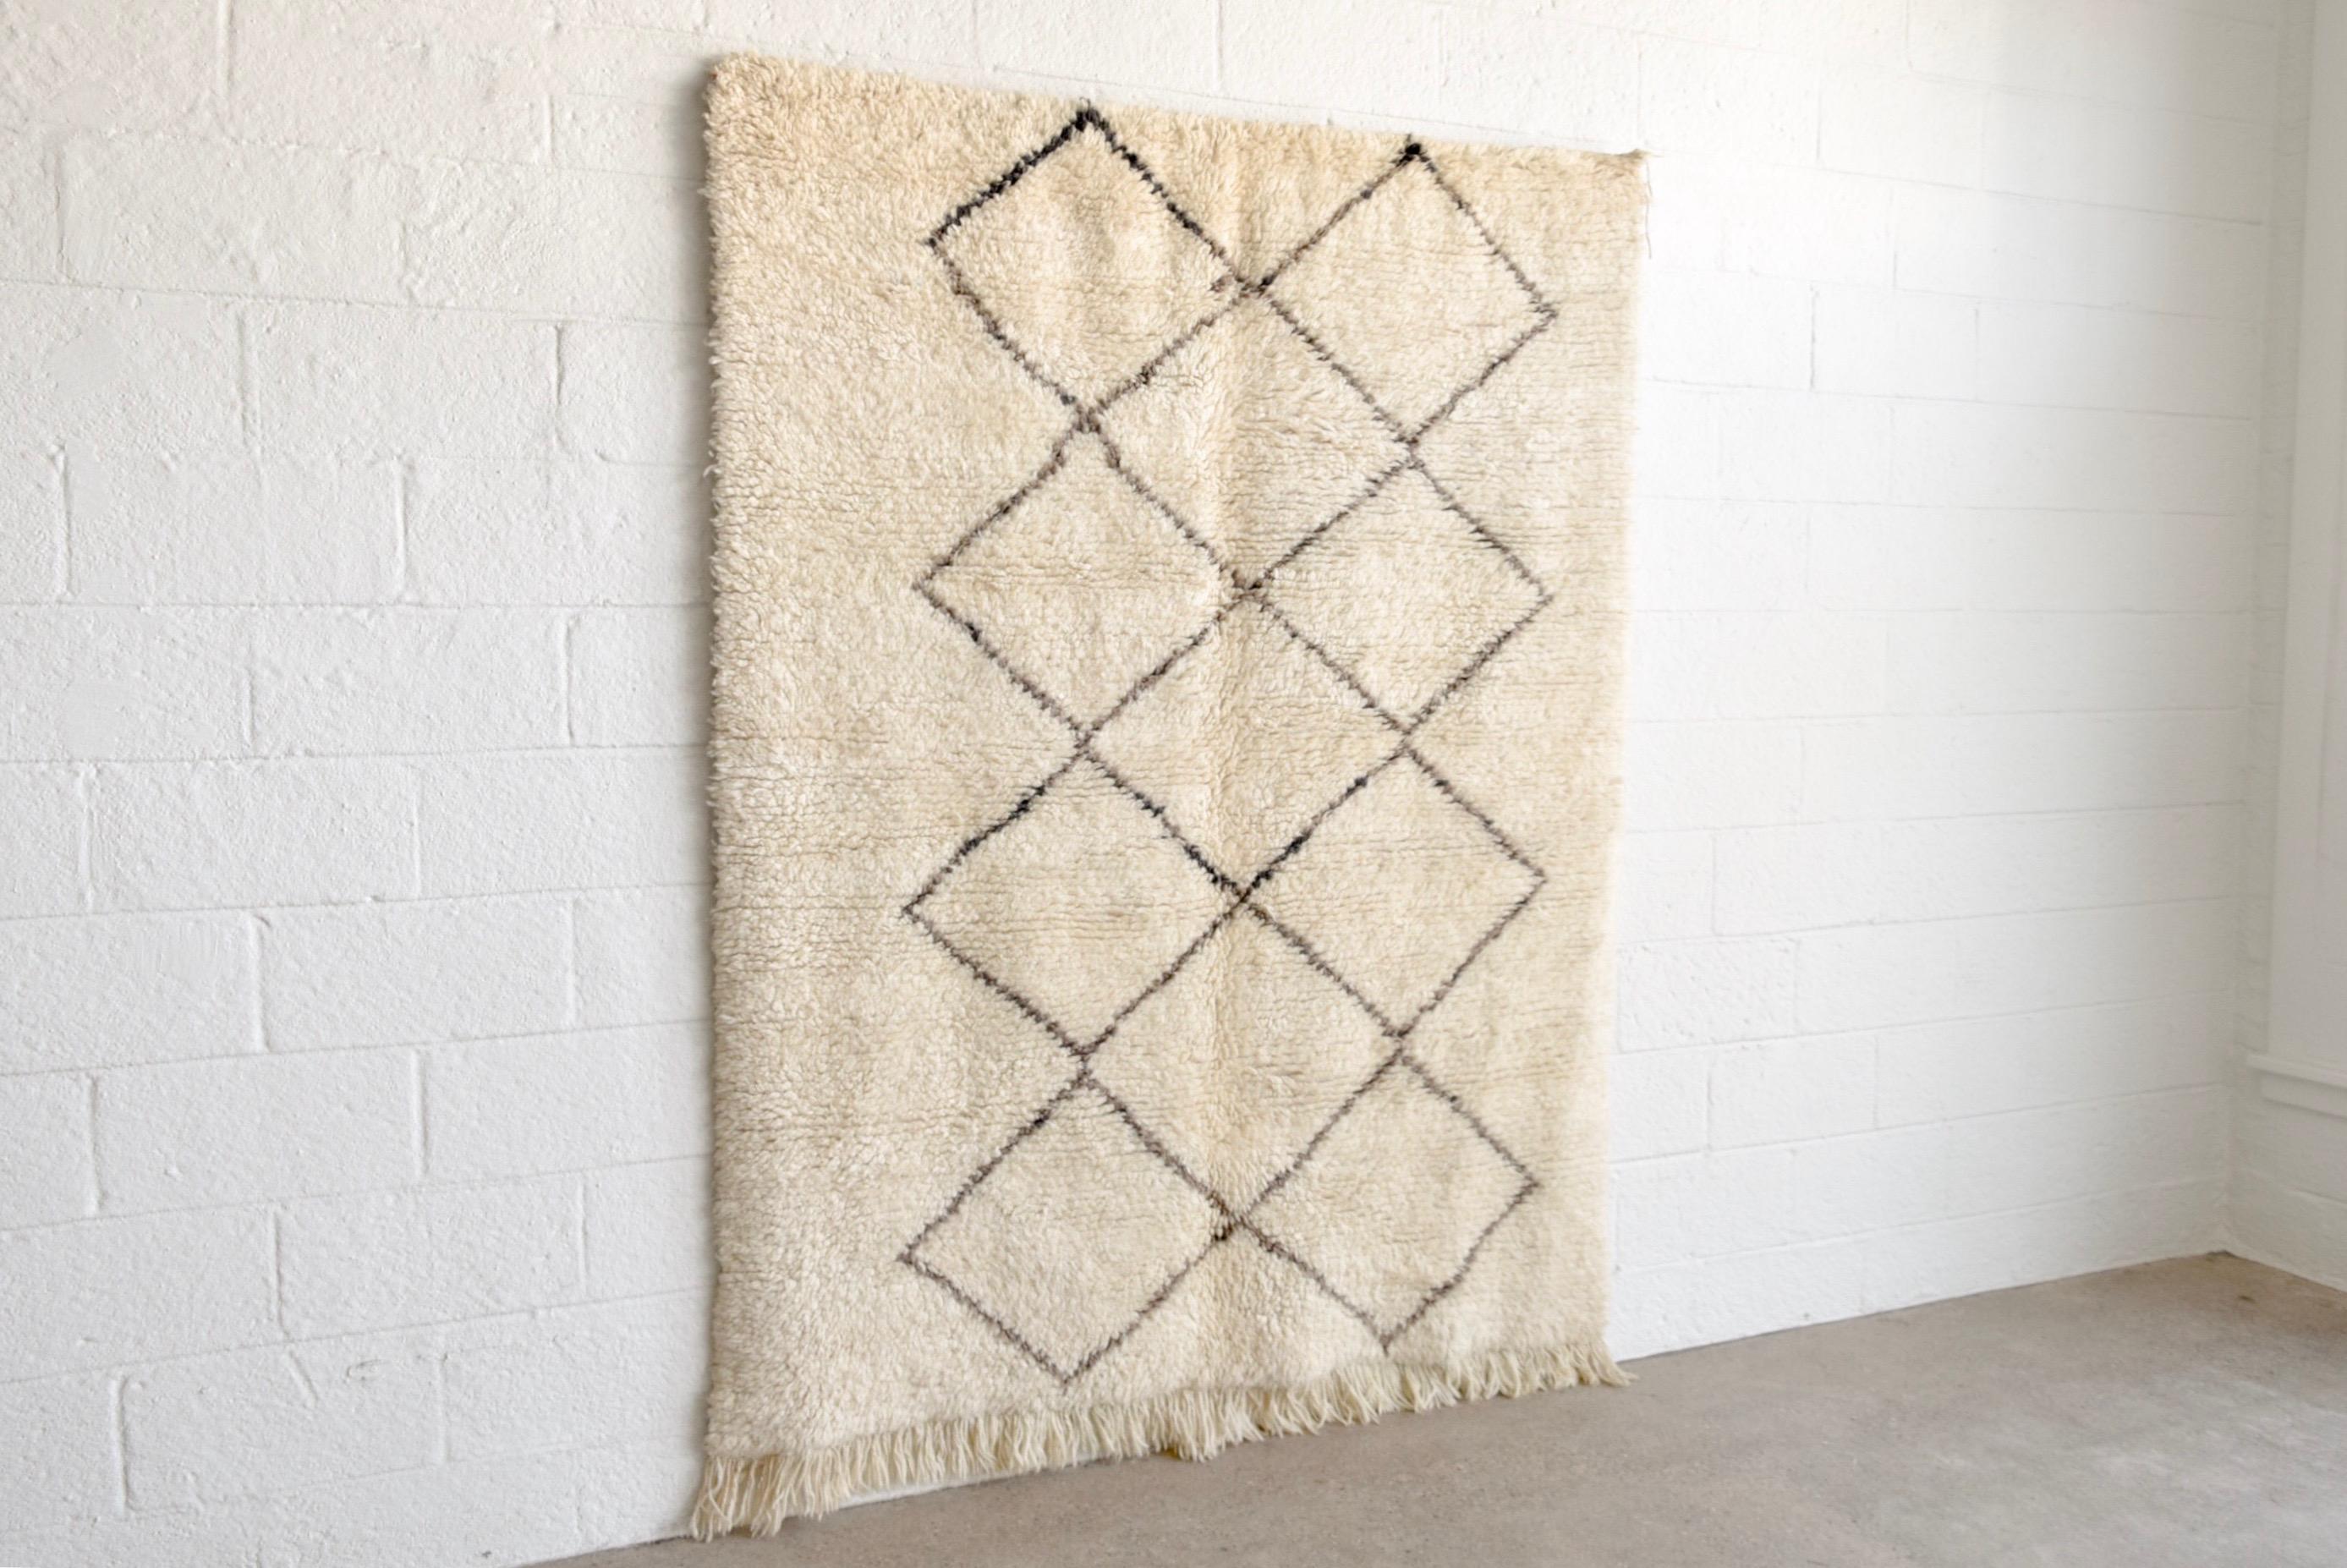 This vintage handwoven Moroccan Berber Beni Ourain area rug features a simple deep charcoal and brown line diamond lattice pattern on a cream field. The thick wool pile is soft and supple and the rug is finished with a natural wool warp fringe to